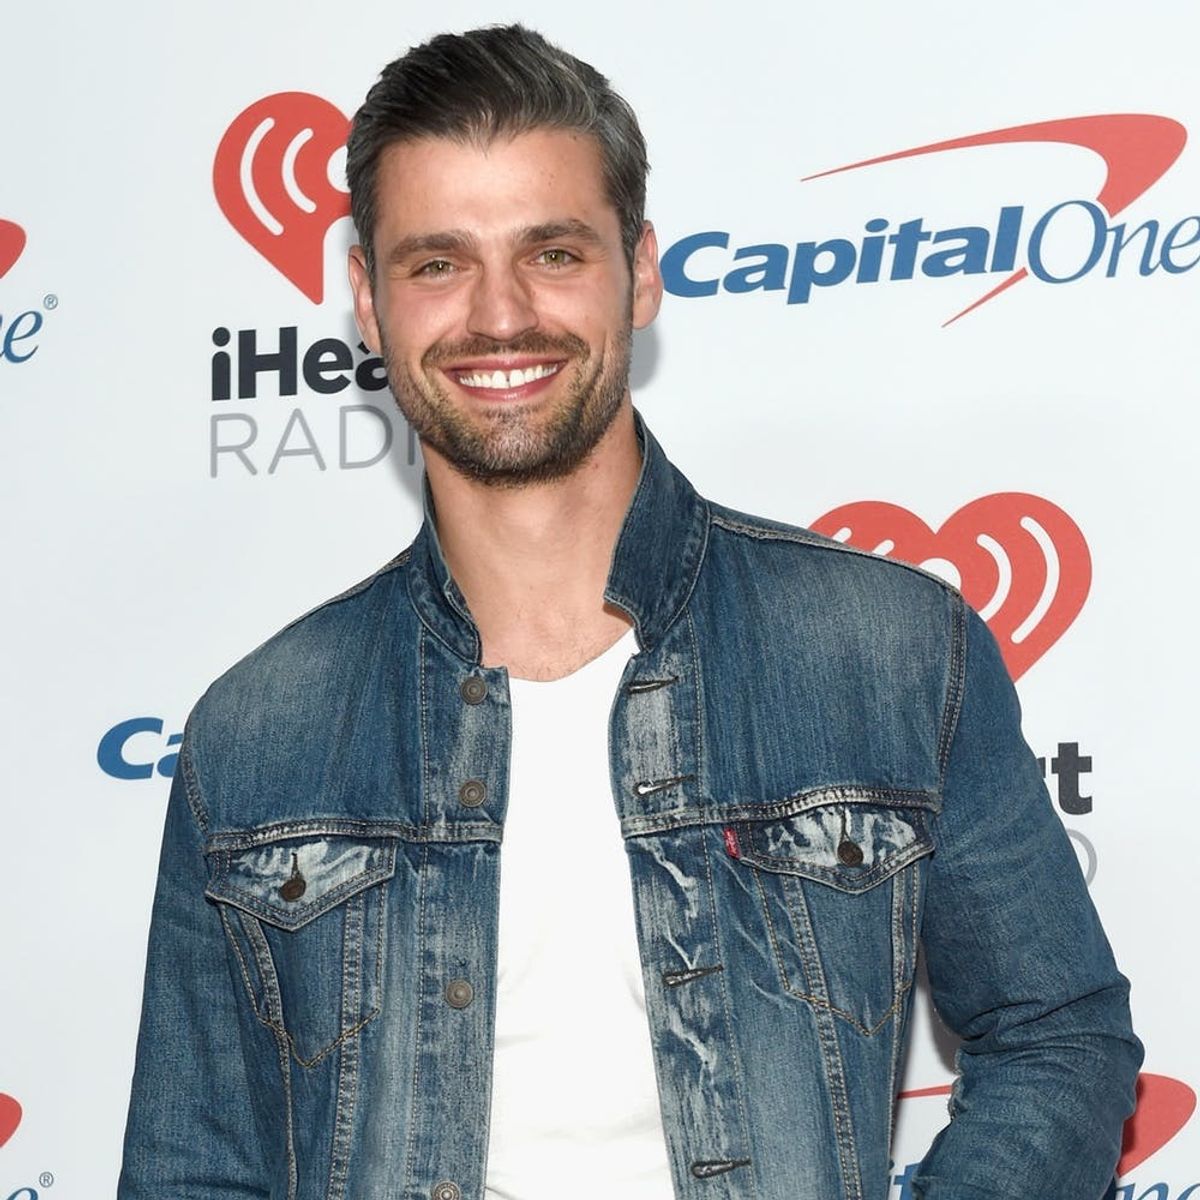 “Bachelorette” Star Peter Kraus Reveals He Struggled With an Eating Disorder